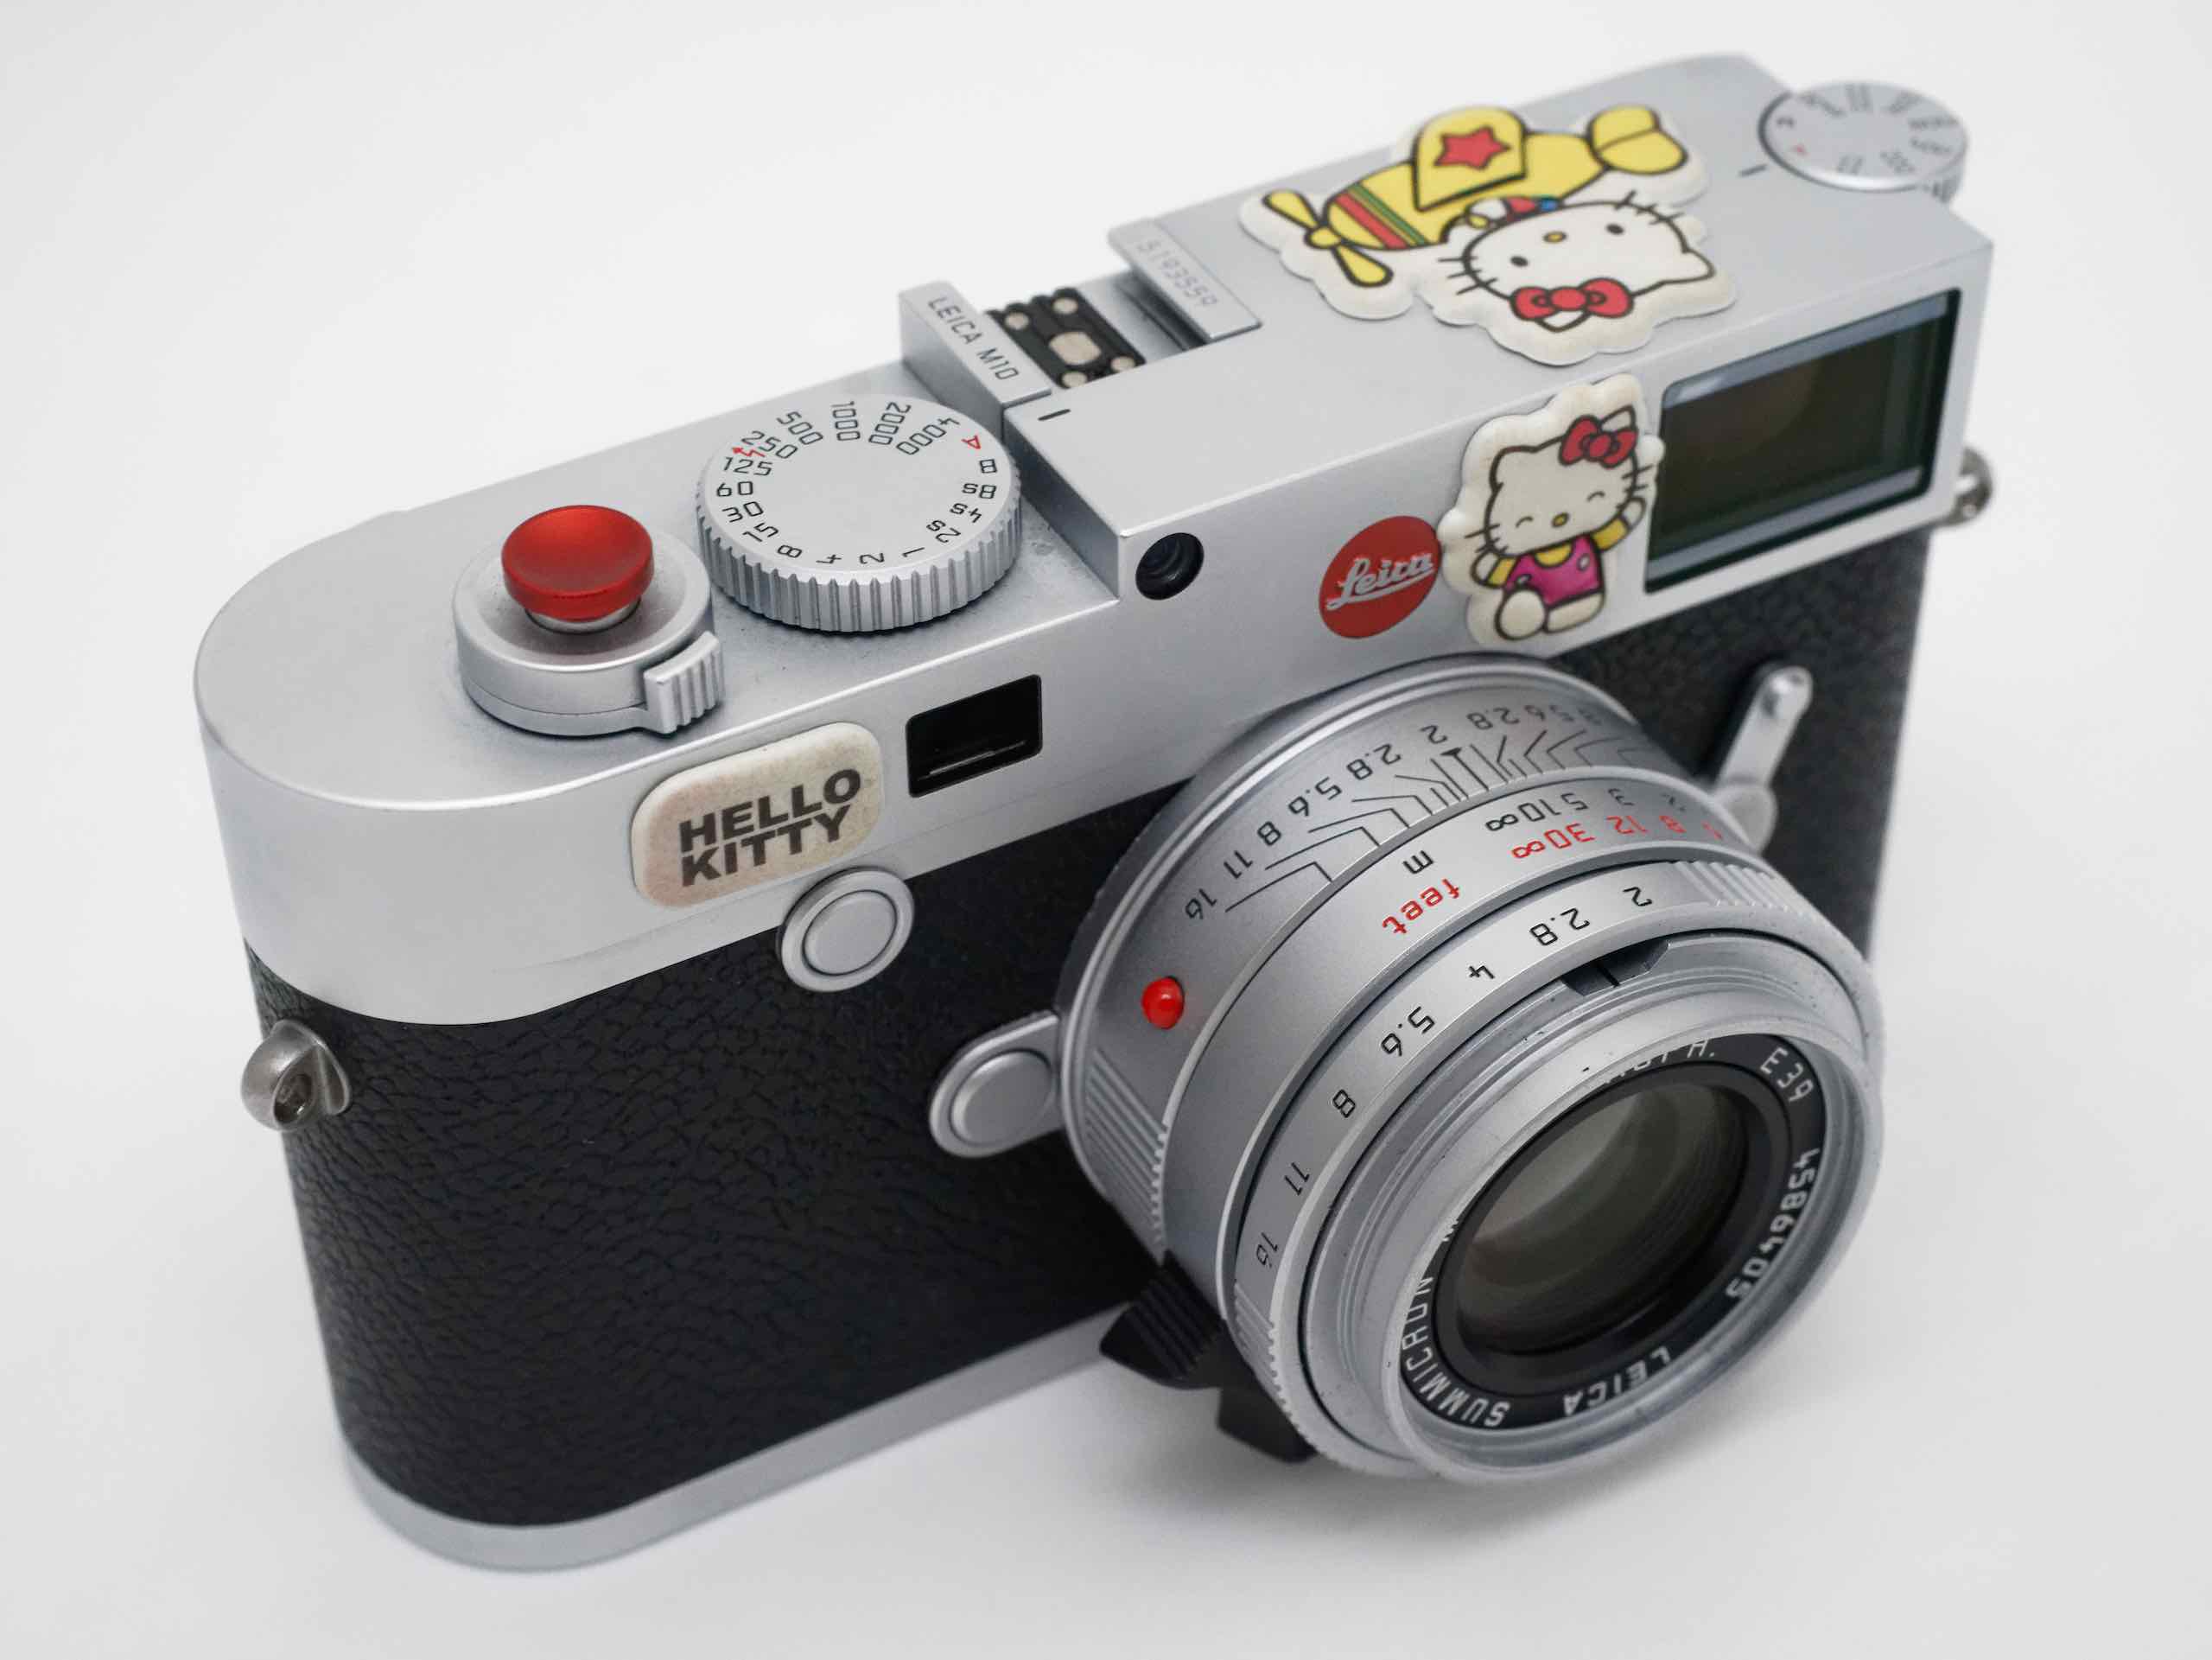 Leica collection featured image